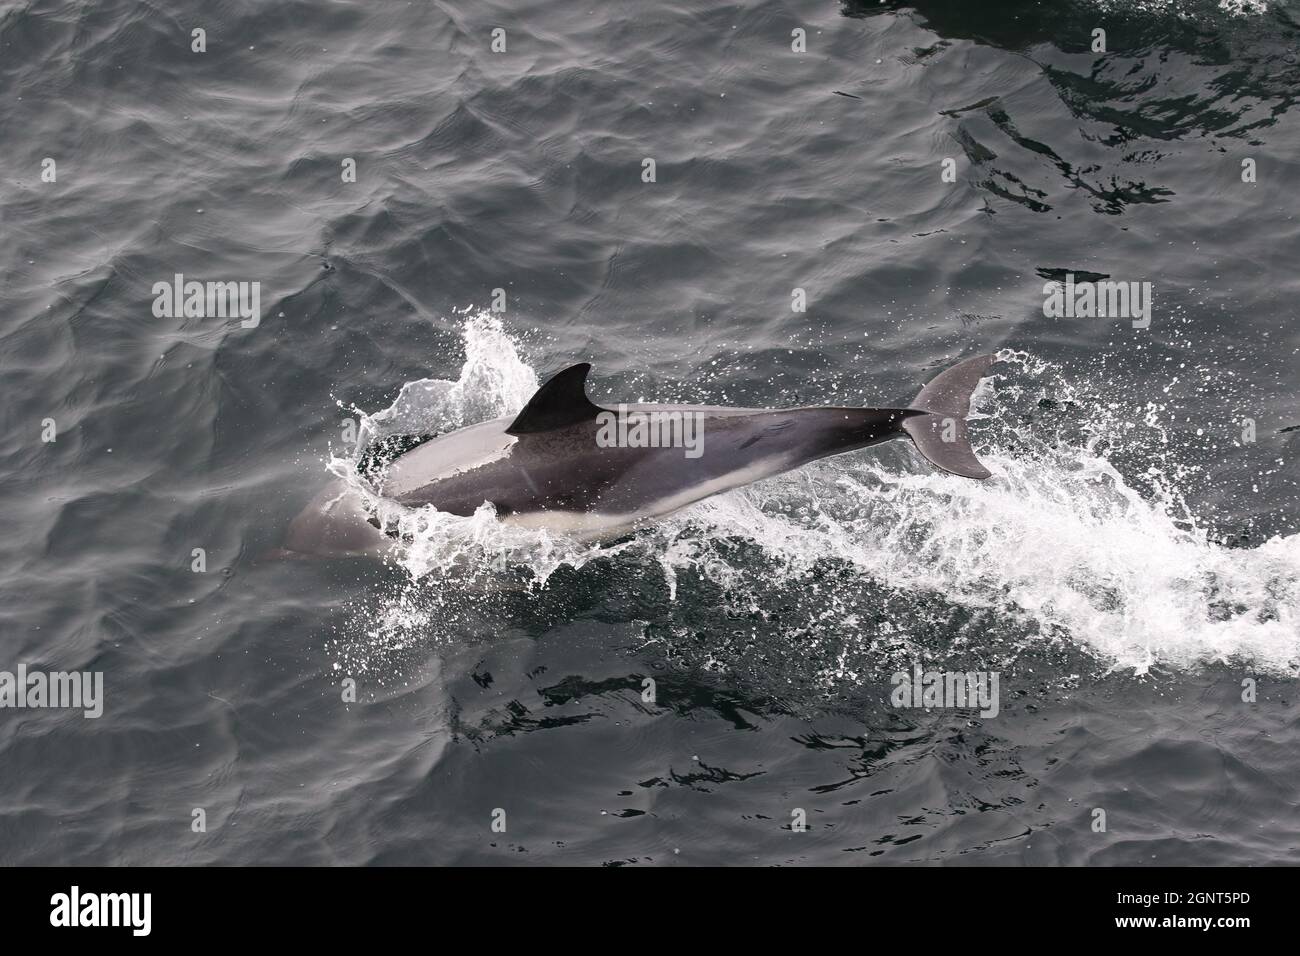 Sequence 5 - Common Dolphin leaping in UK waters Stock Photo